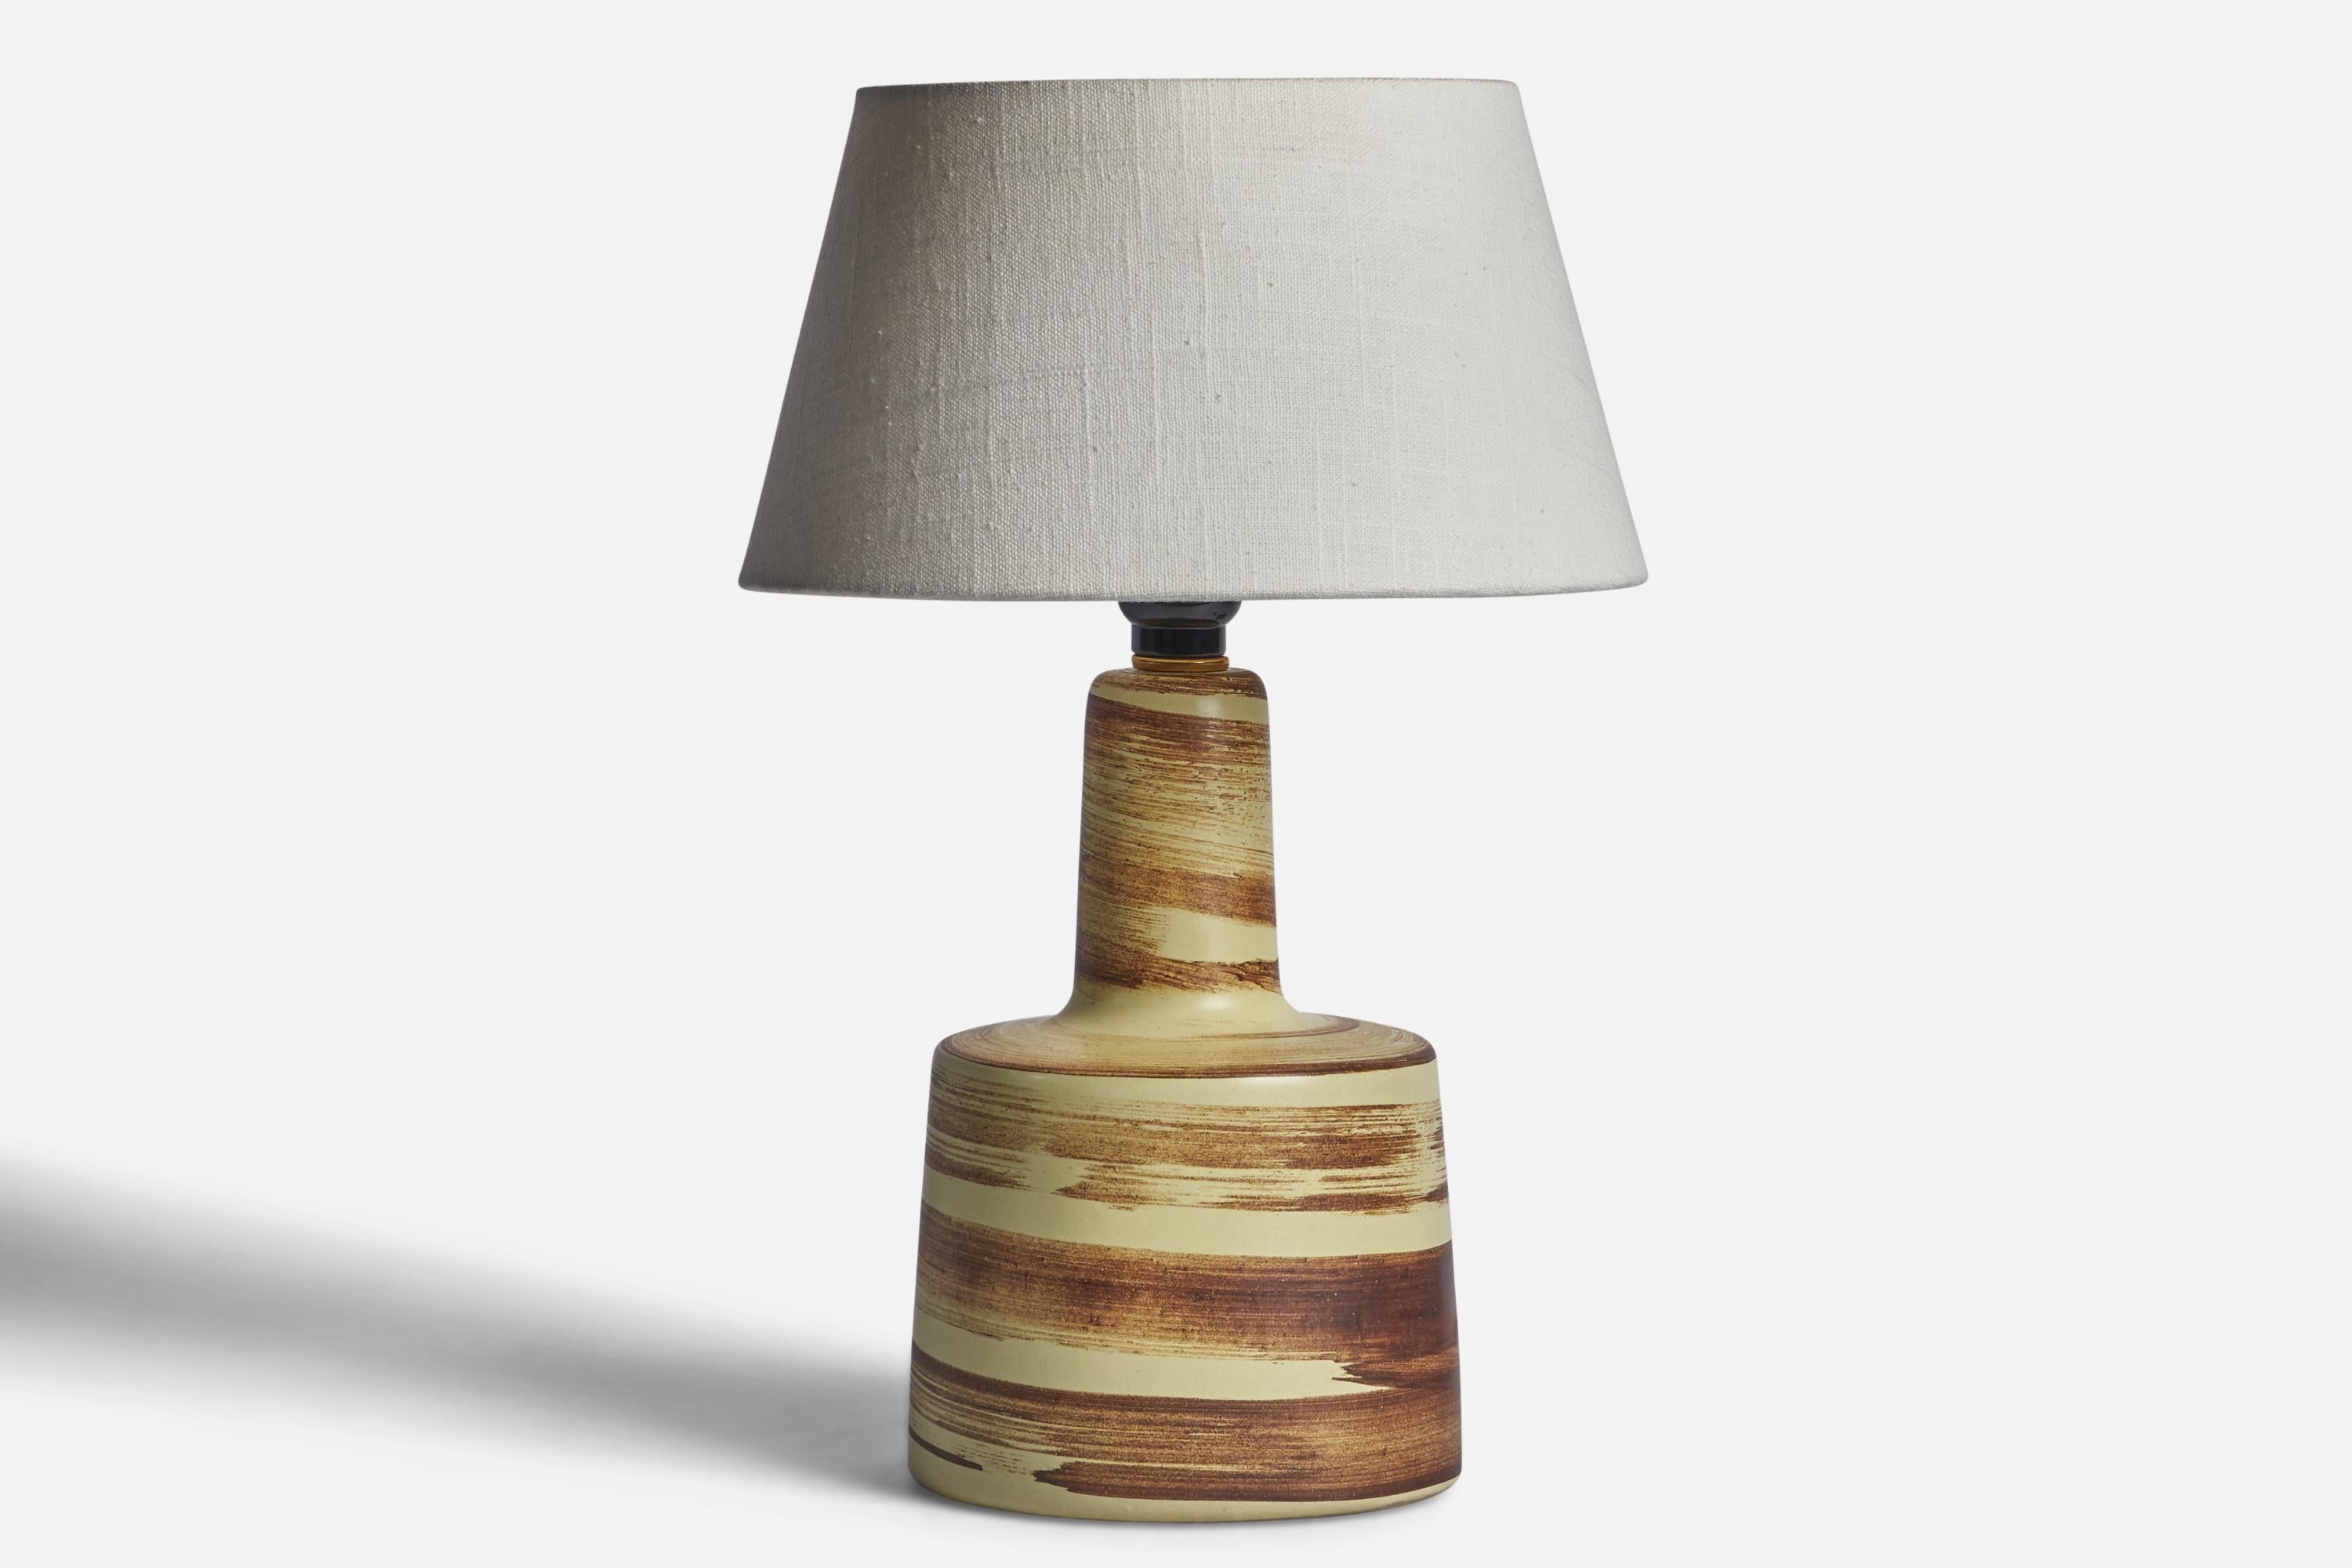 A beige and brown-glazed ceramic table lamp designed by Jane & Gordon Martz and produced by Marshall Studios, USA, 1960s.

Dimensions of Lamp (inches): 12” H x 6.15” Diameter
Dimensions of Shade (inches): 7” Top Diameter x 10” Bottom Diameter x 5.5”